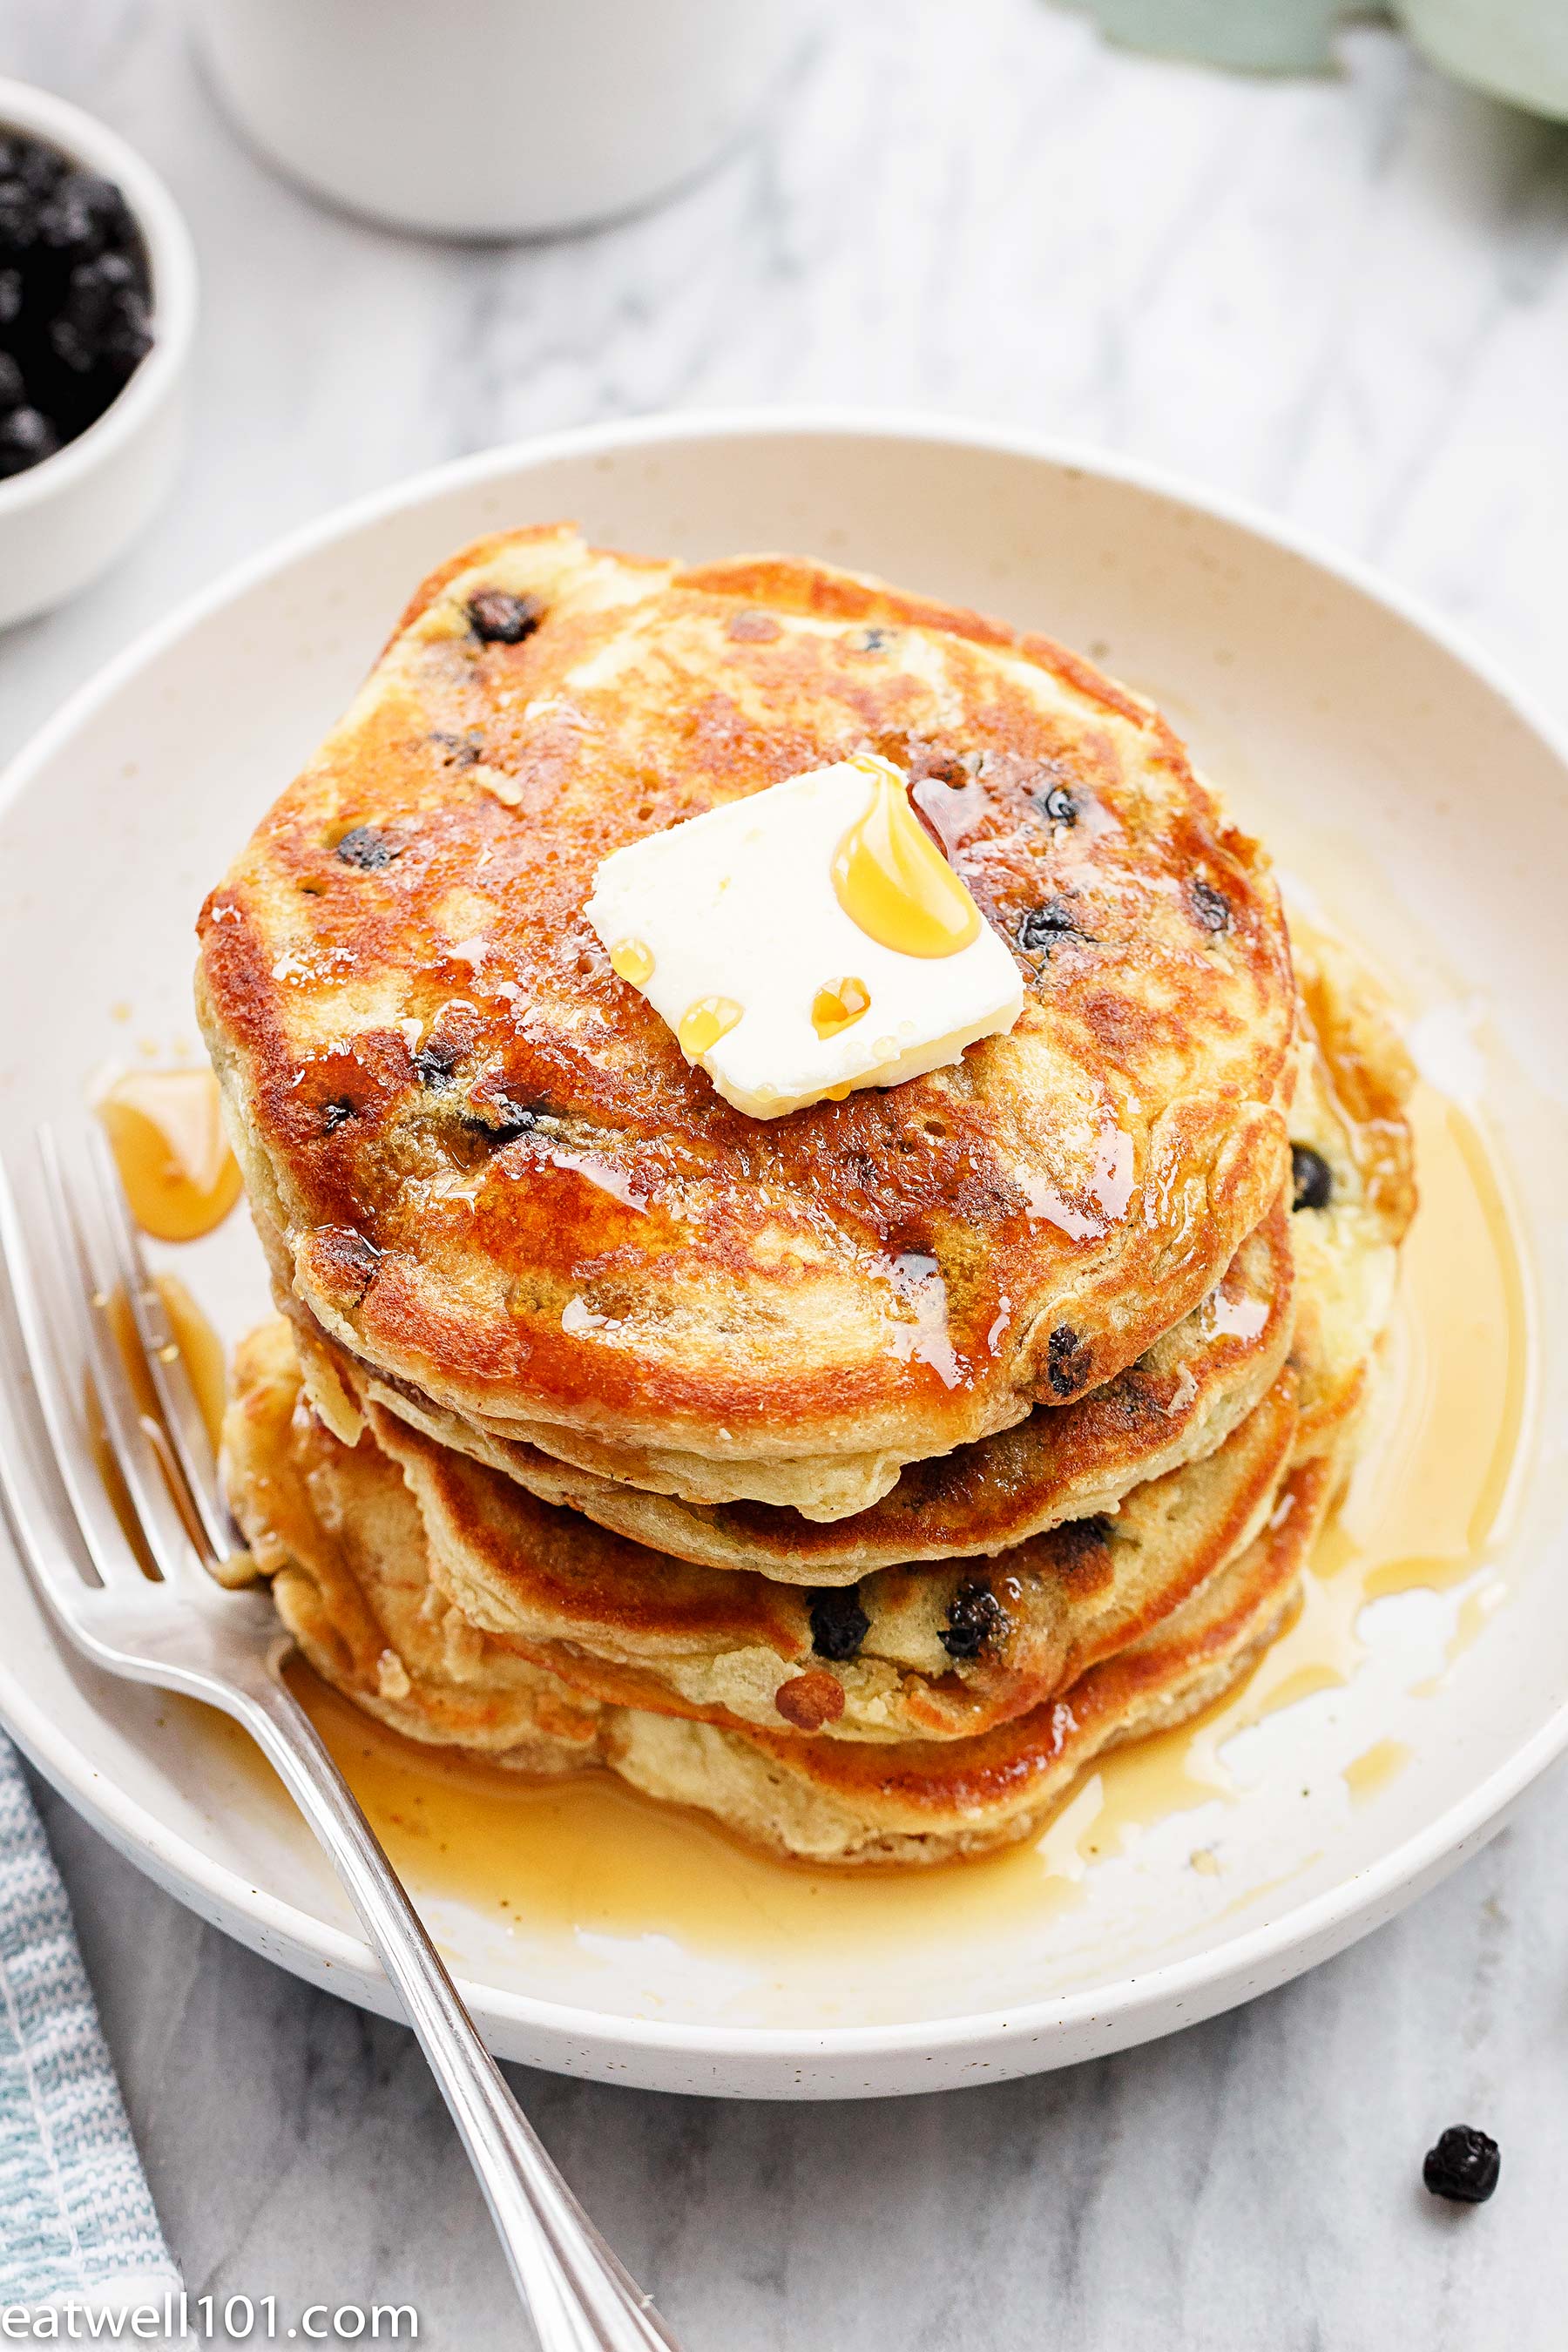 blueberry pancakes recipe for brunch